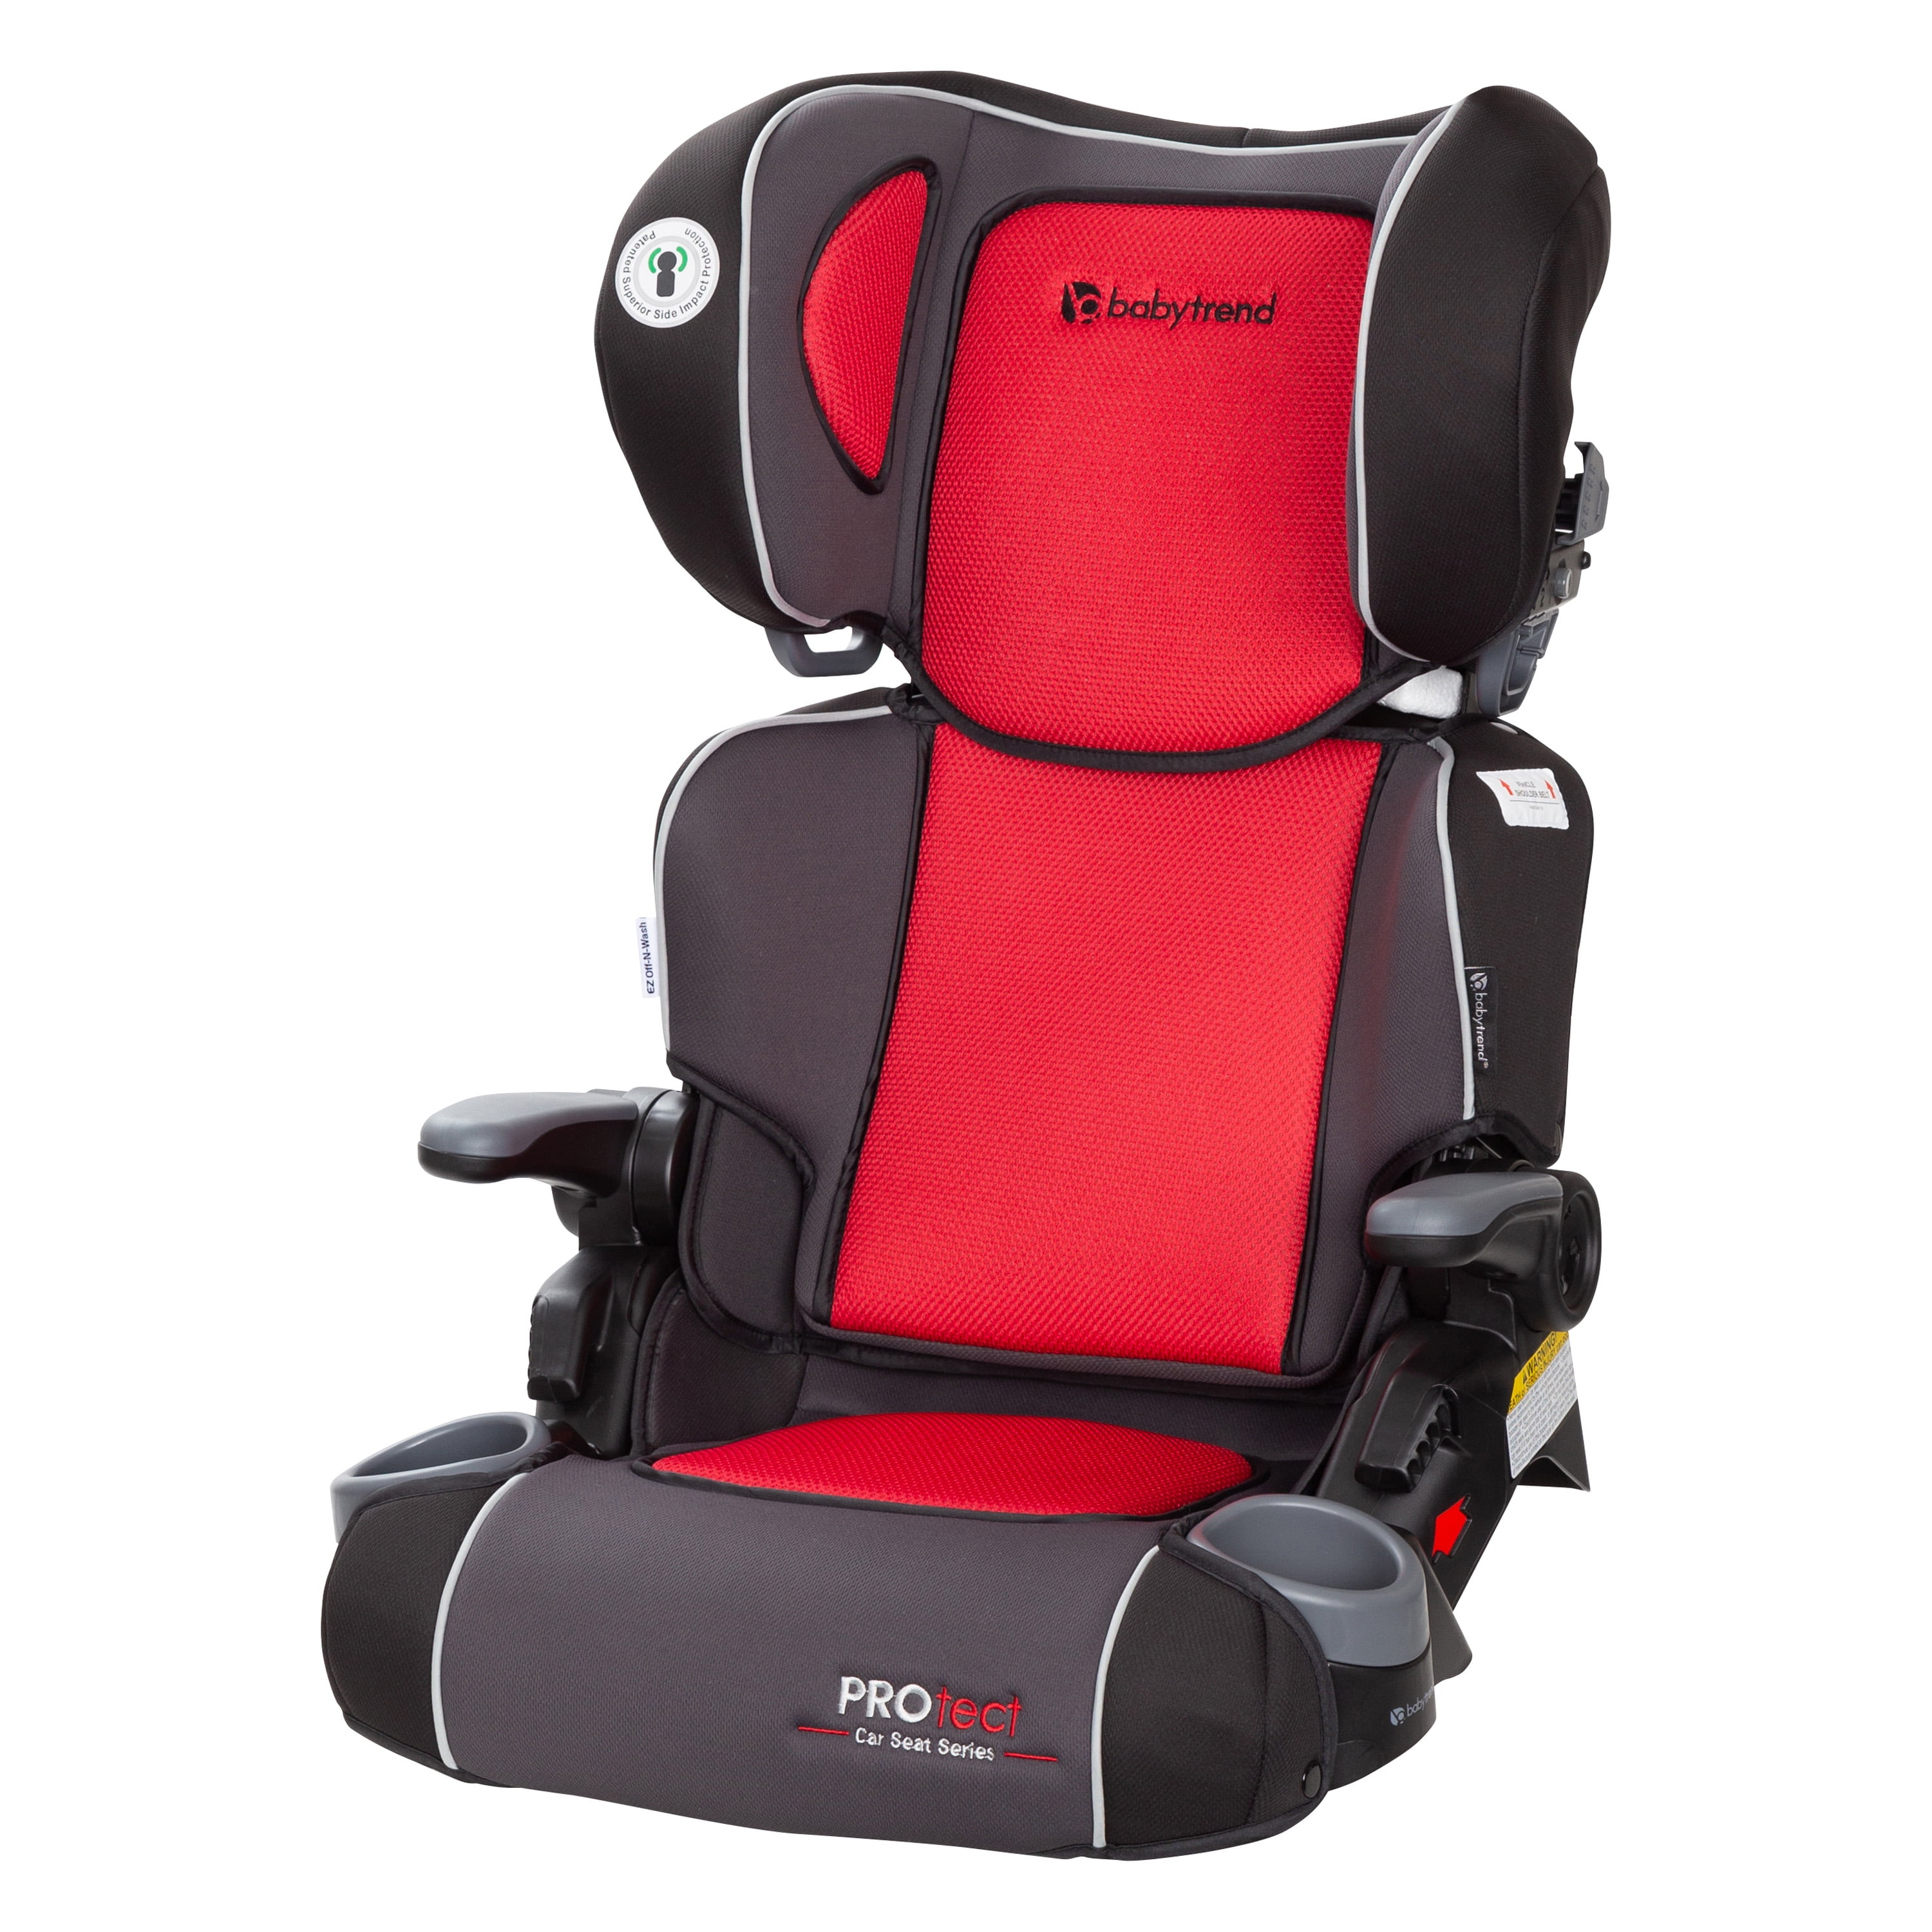 Travel Car Seat For A 5 Year Old, What Car Seat For 5 Year Old